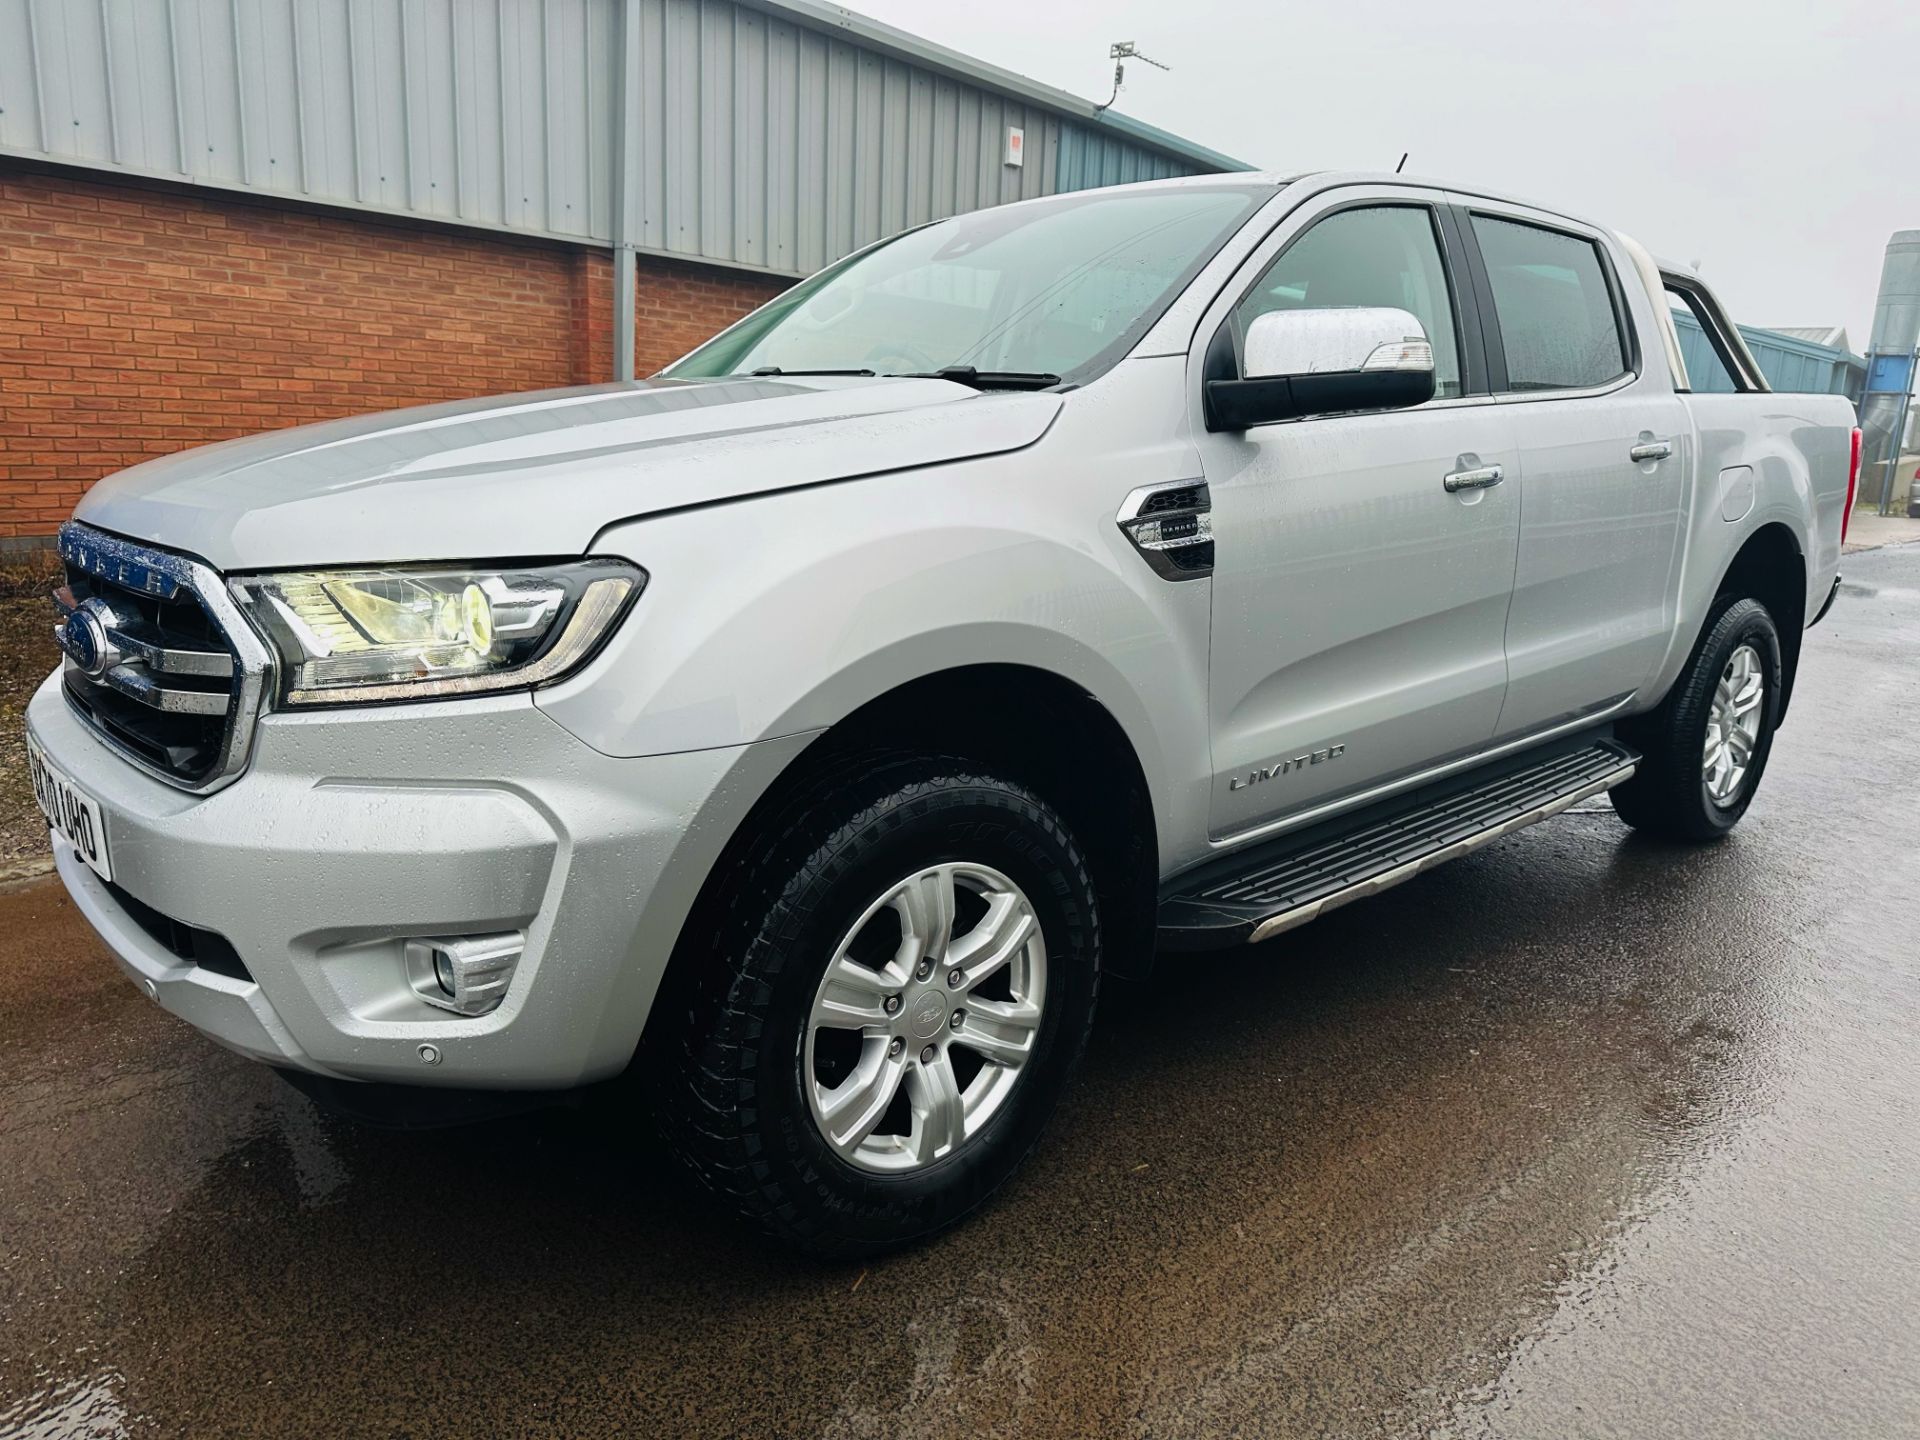 Ford Ranger 2.0 TDCI LIMITED 170BHP Auto SS (2021 Model) Huge Spec -Sat Nav Leather 35k Miles Only - Image 6 of 44